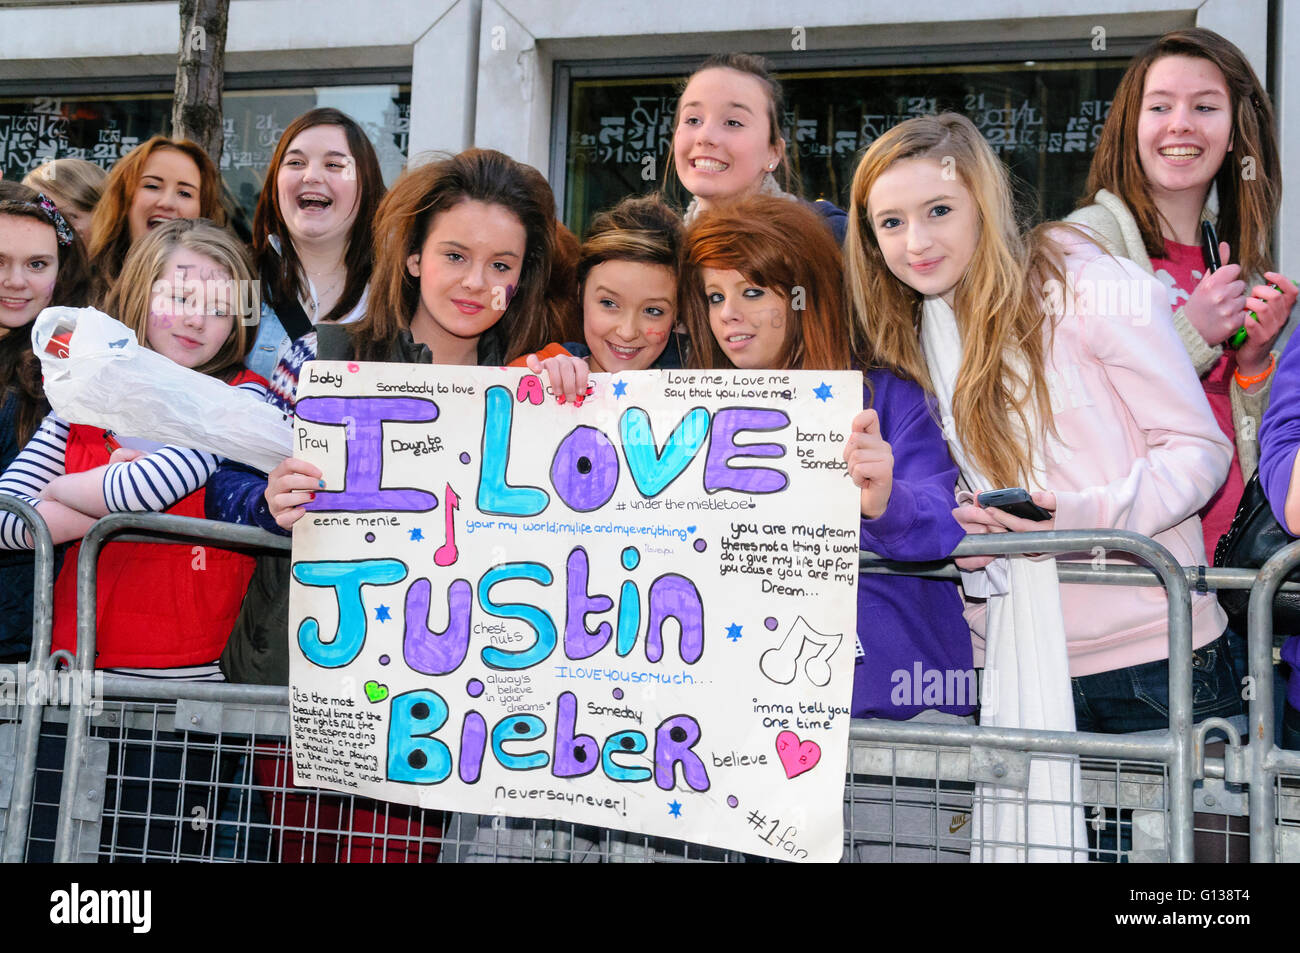 Justin Bieber Fans High Resolution Stock Photography and Images - Alamy